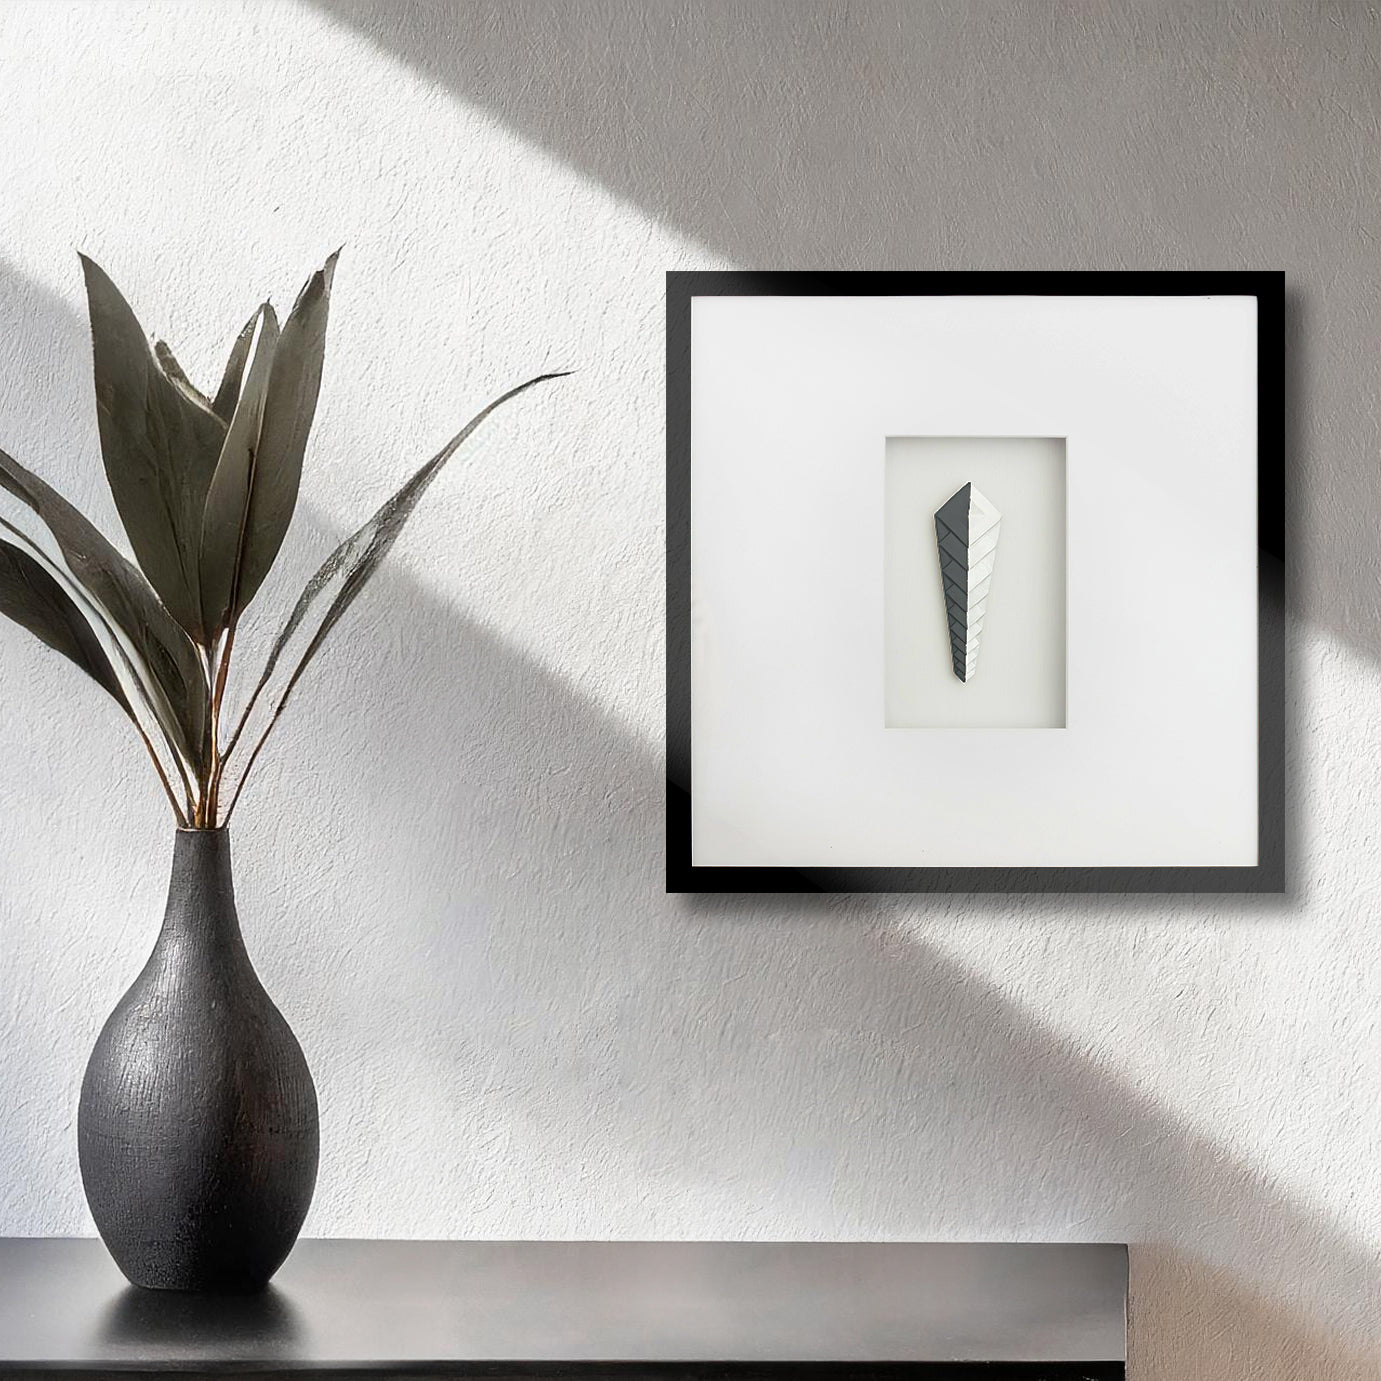 Contemporary framed art deco black and white artwork on textured wall with vase and plant.